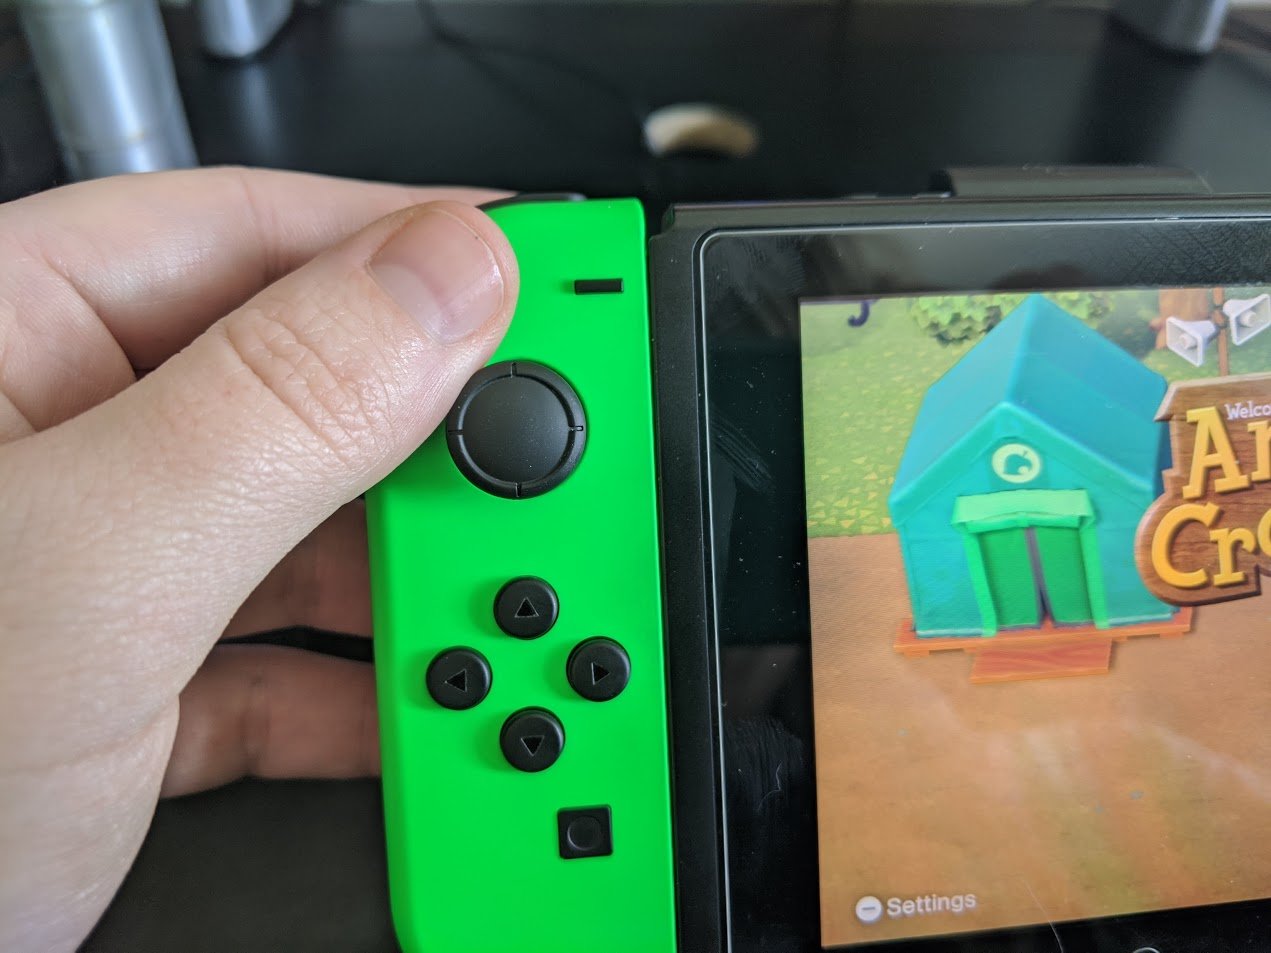 How to scan QR codes in ACNH: Press the - button on the left side of your Joy-Cons or controller